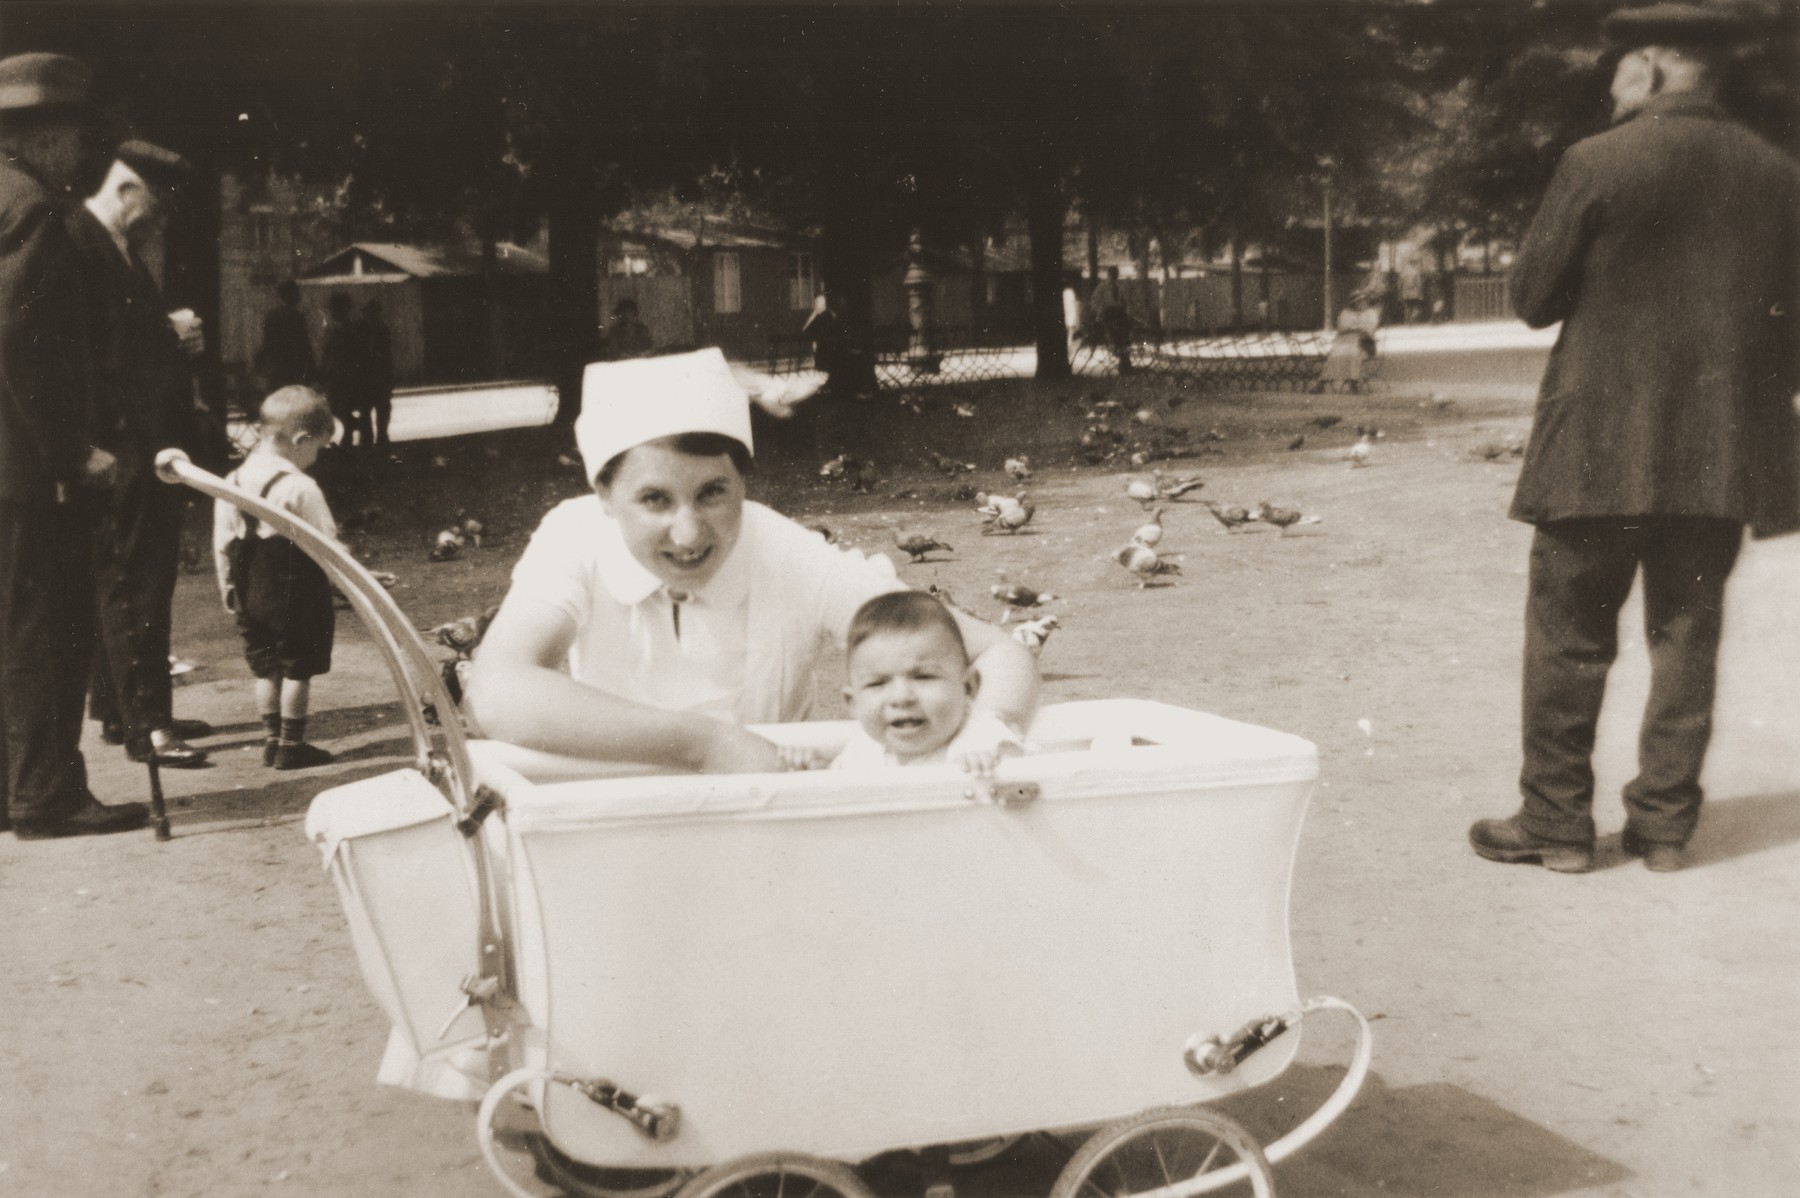 Evgenia Goldstein, the baby daughter of Sonja Schadur and Bernhard Goldstein, sits in her baby carriage in a Berlin park.  Posing with Evgenia is her nursemaid.